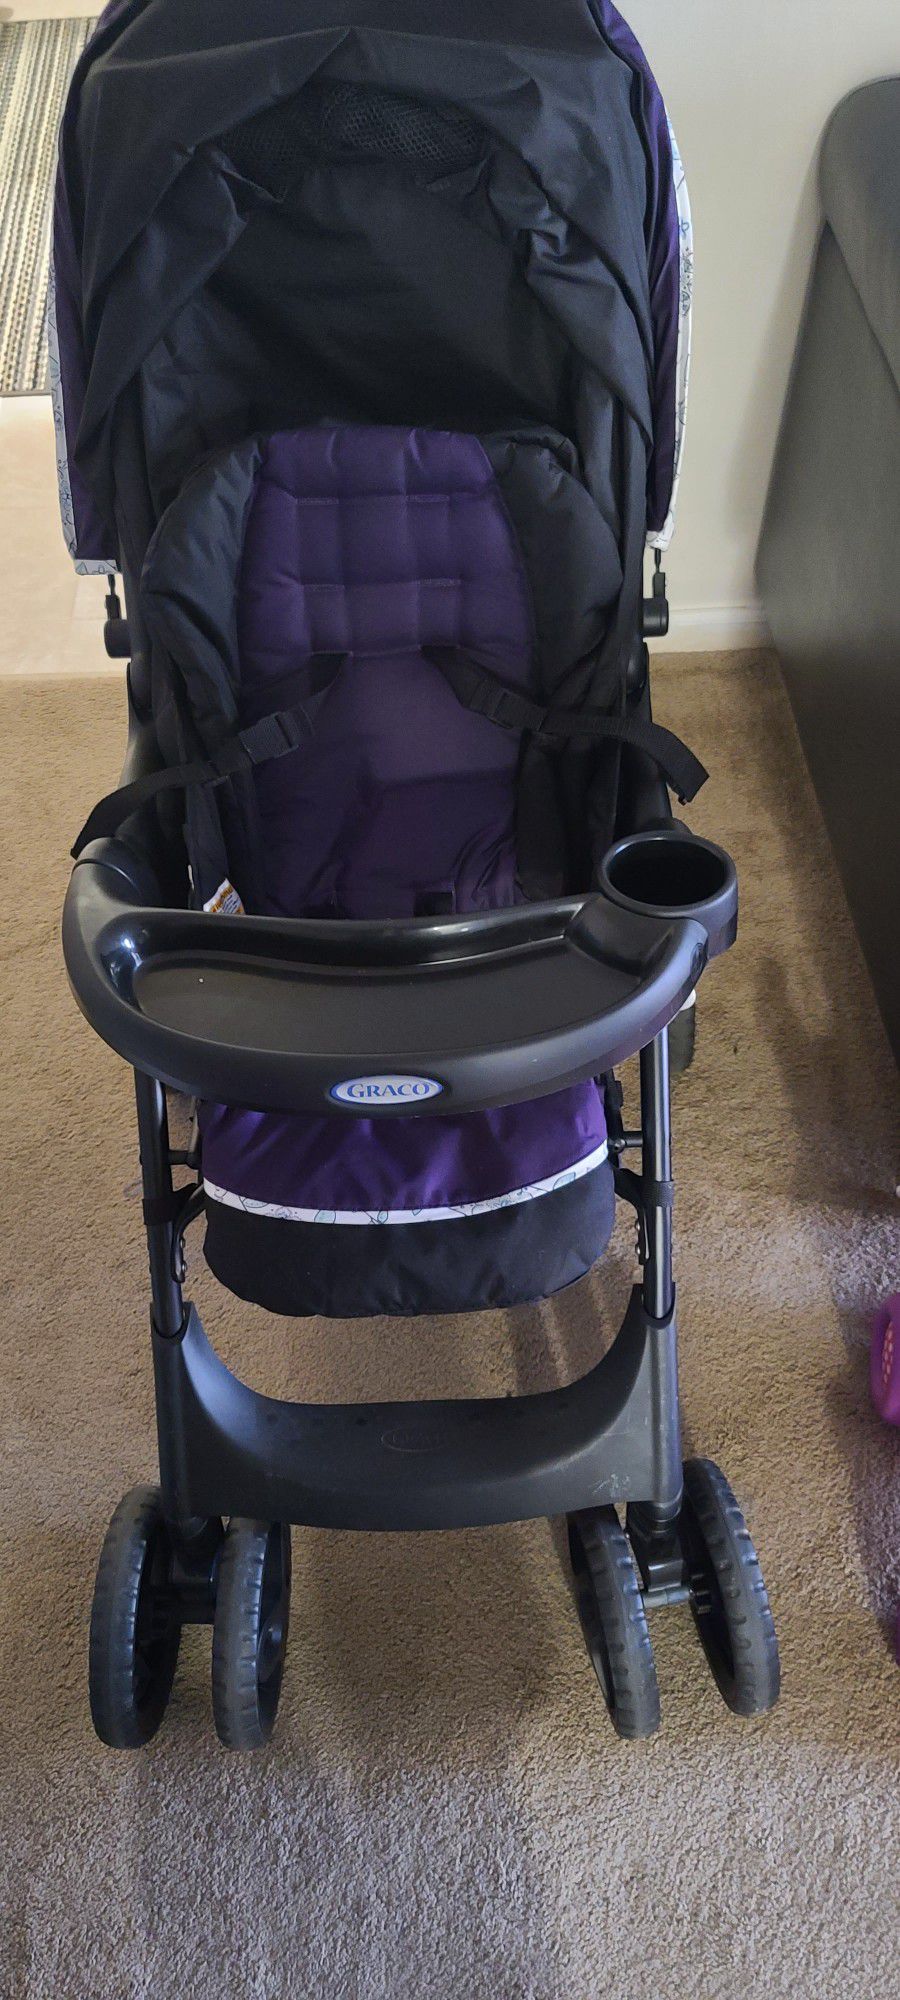 GRACO INFANT STROLLER 3-1 TRAVEL SYSTEMS